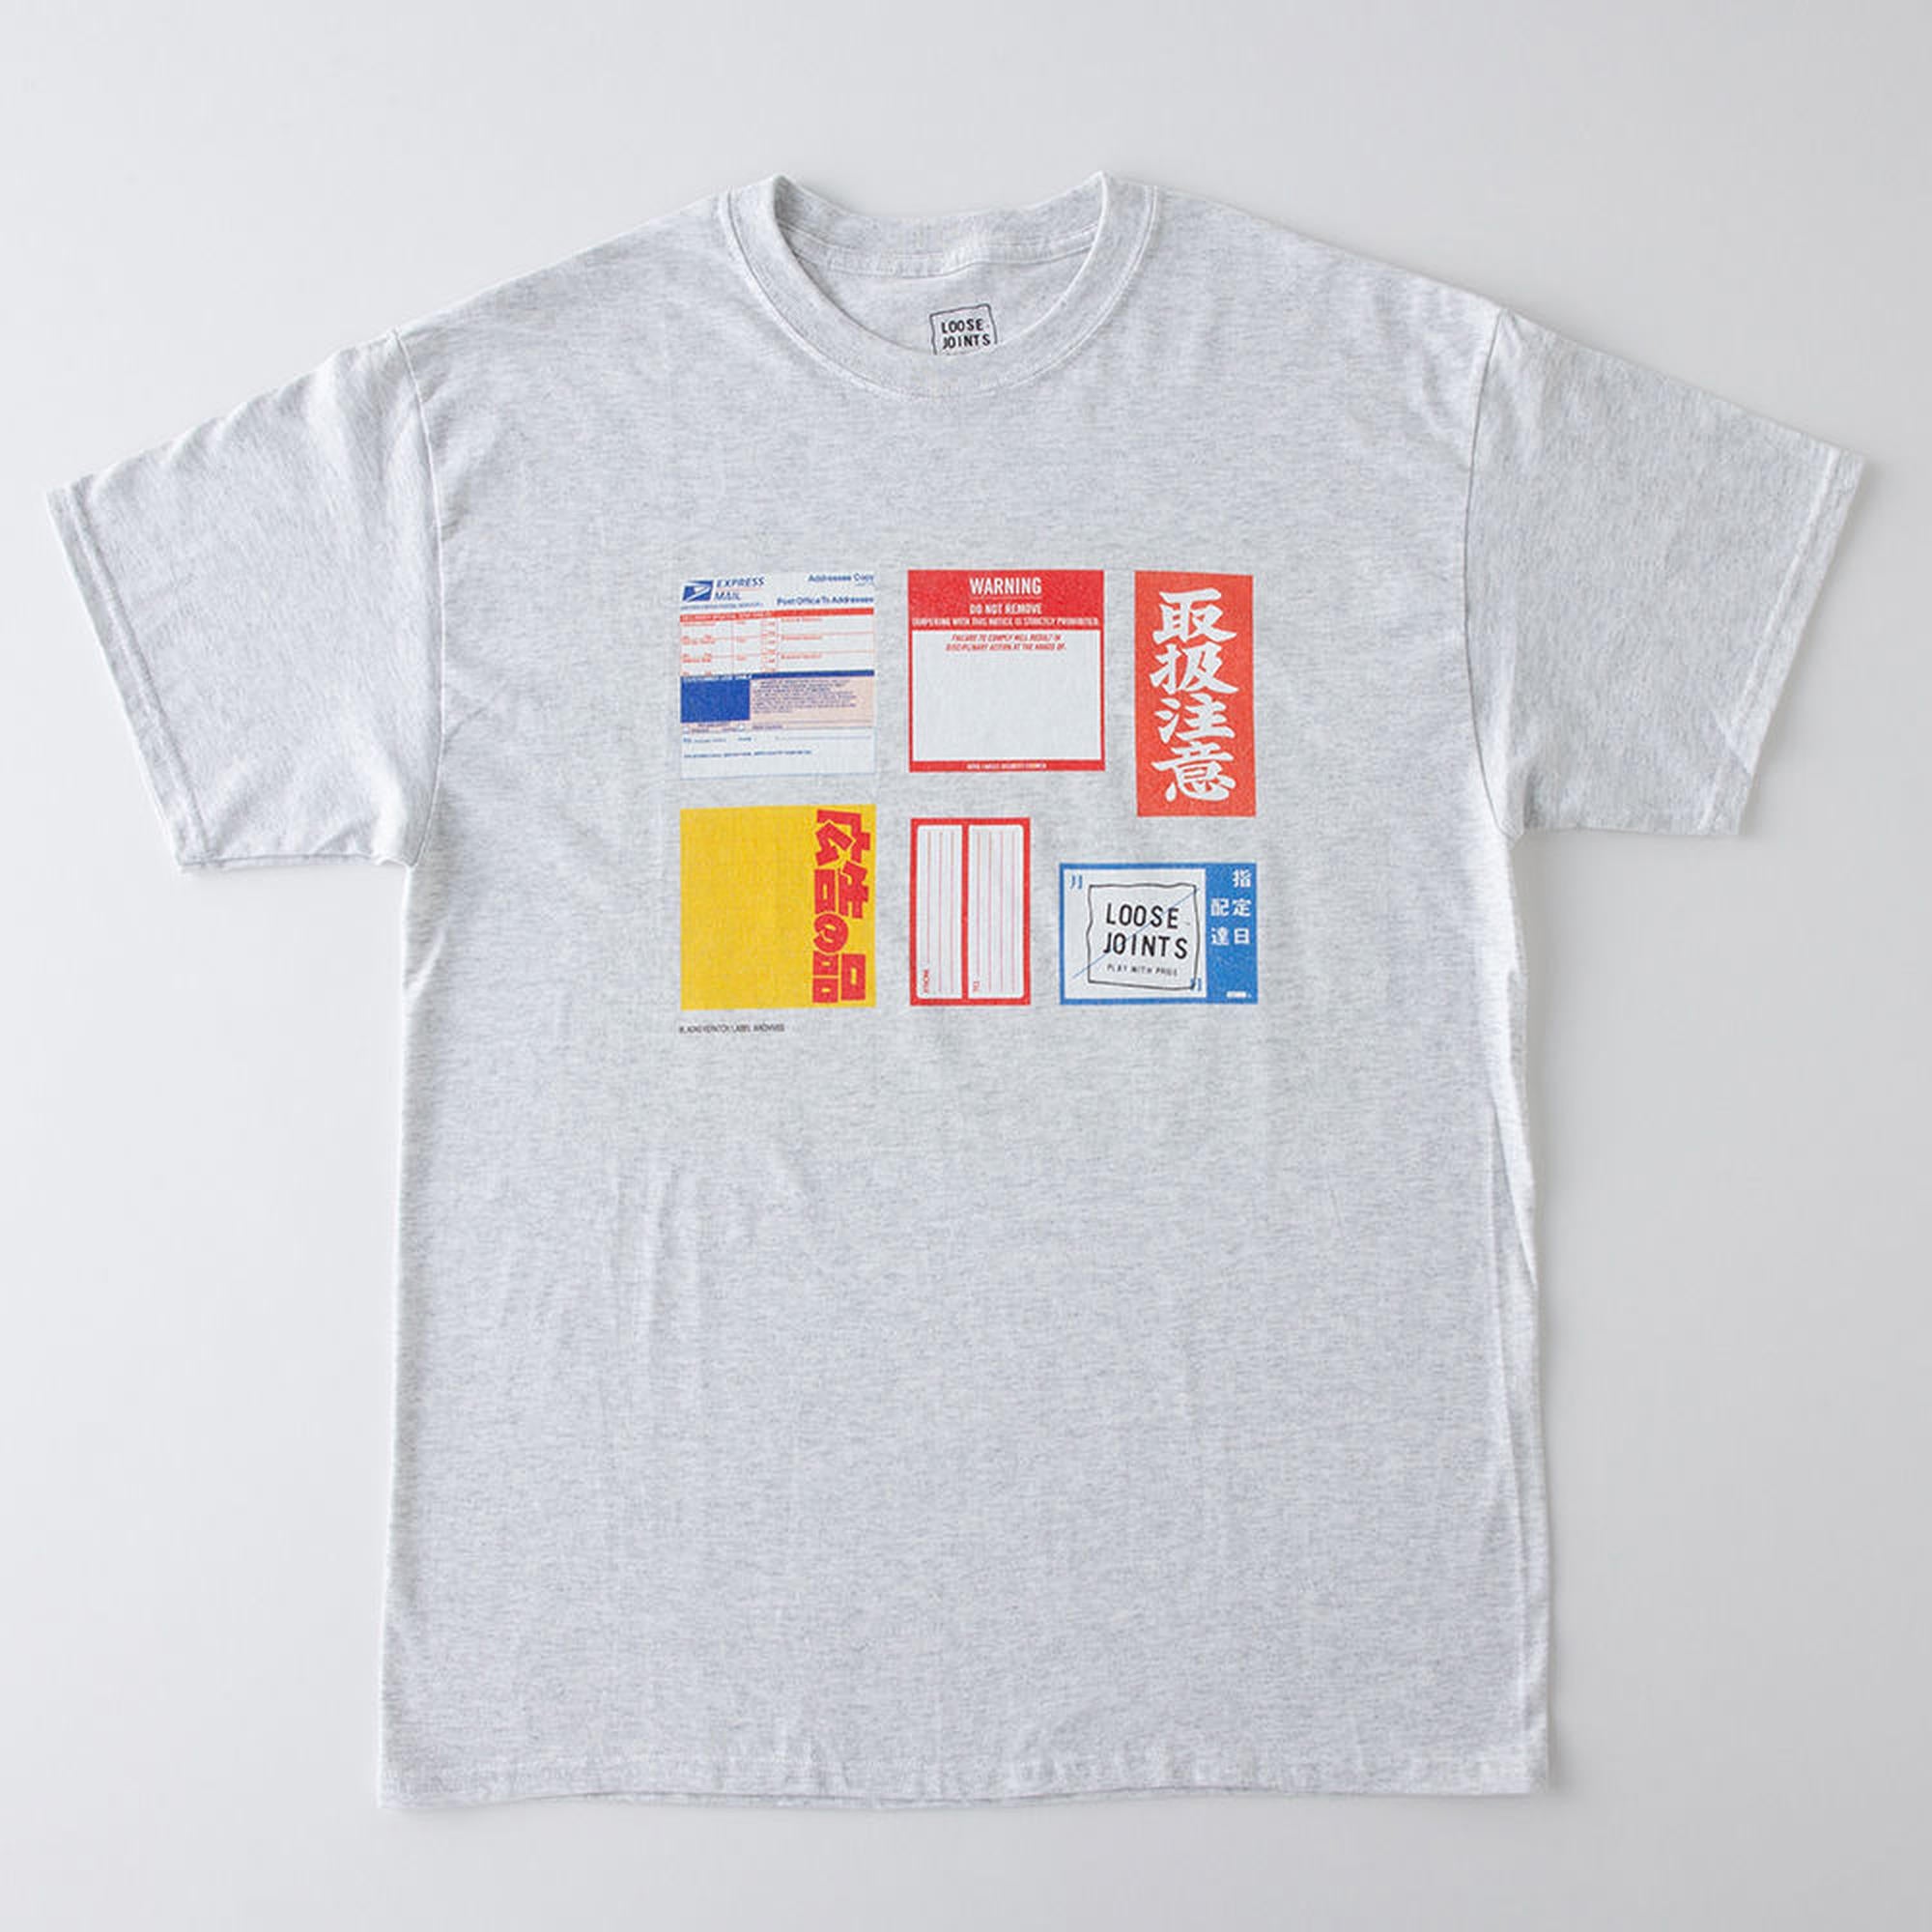 BLACKEYEPATCH - 'LABEL_ARCHIVES' S/S TEE